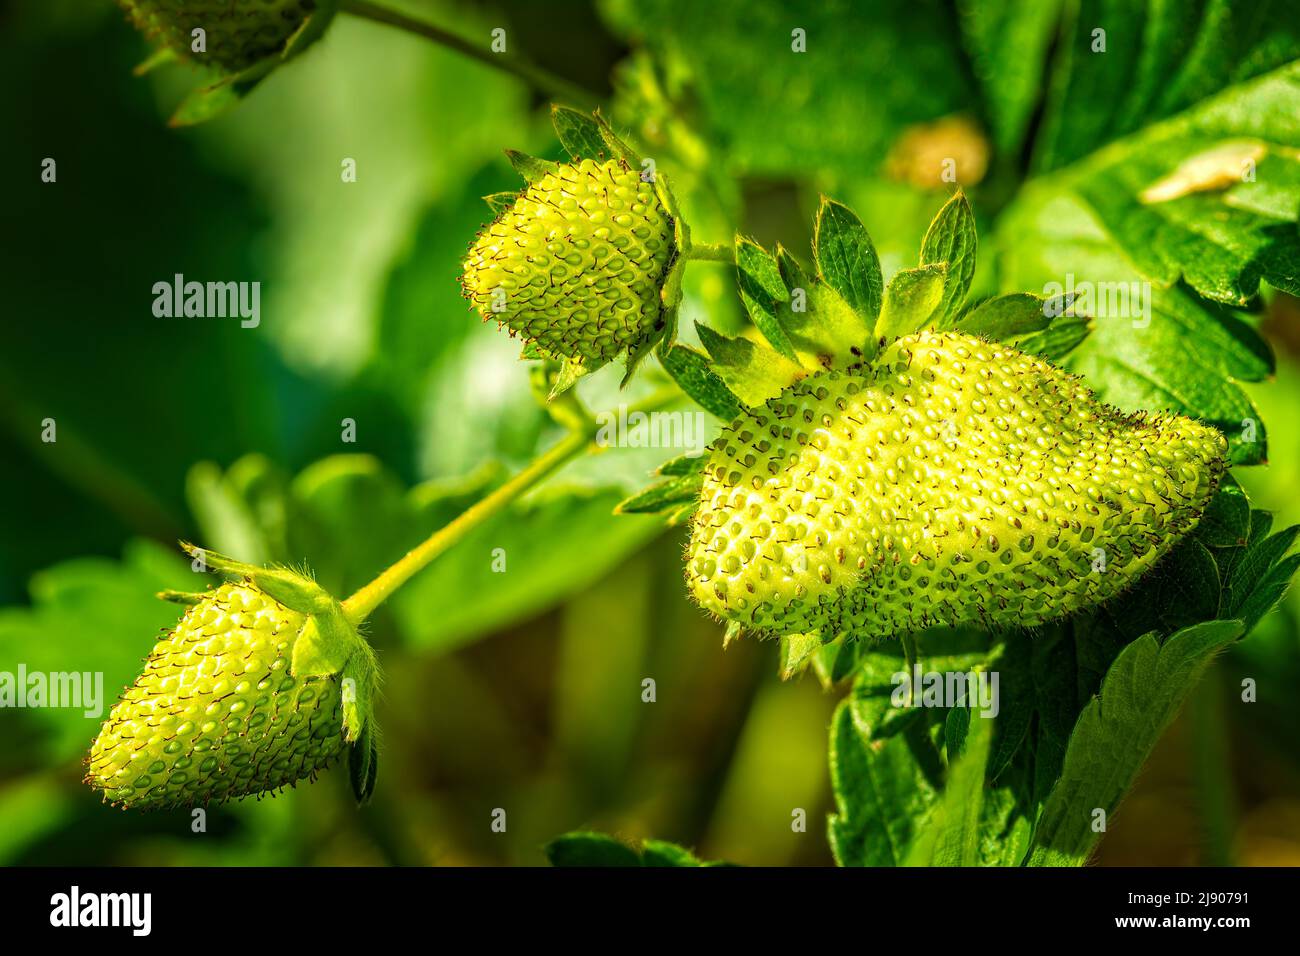 Green, unripe strawberries growing until they will turn red and ready to harvest Stock Photo